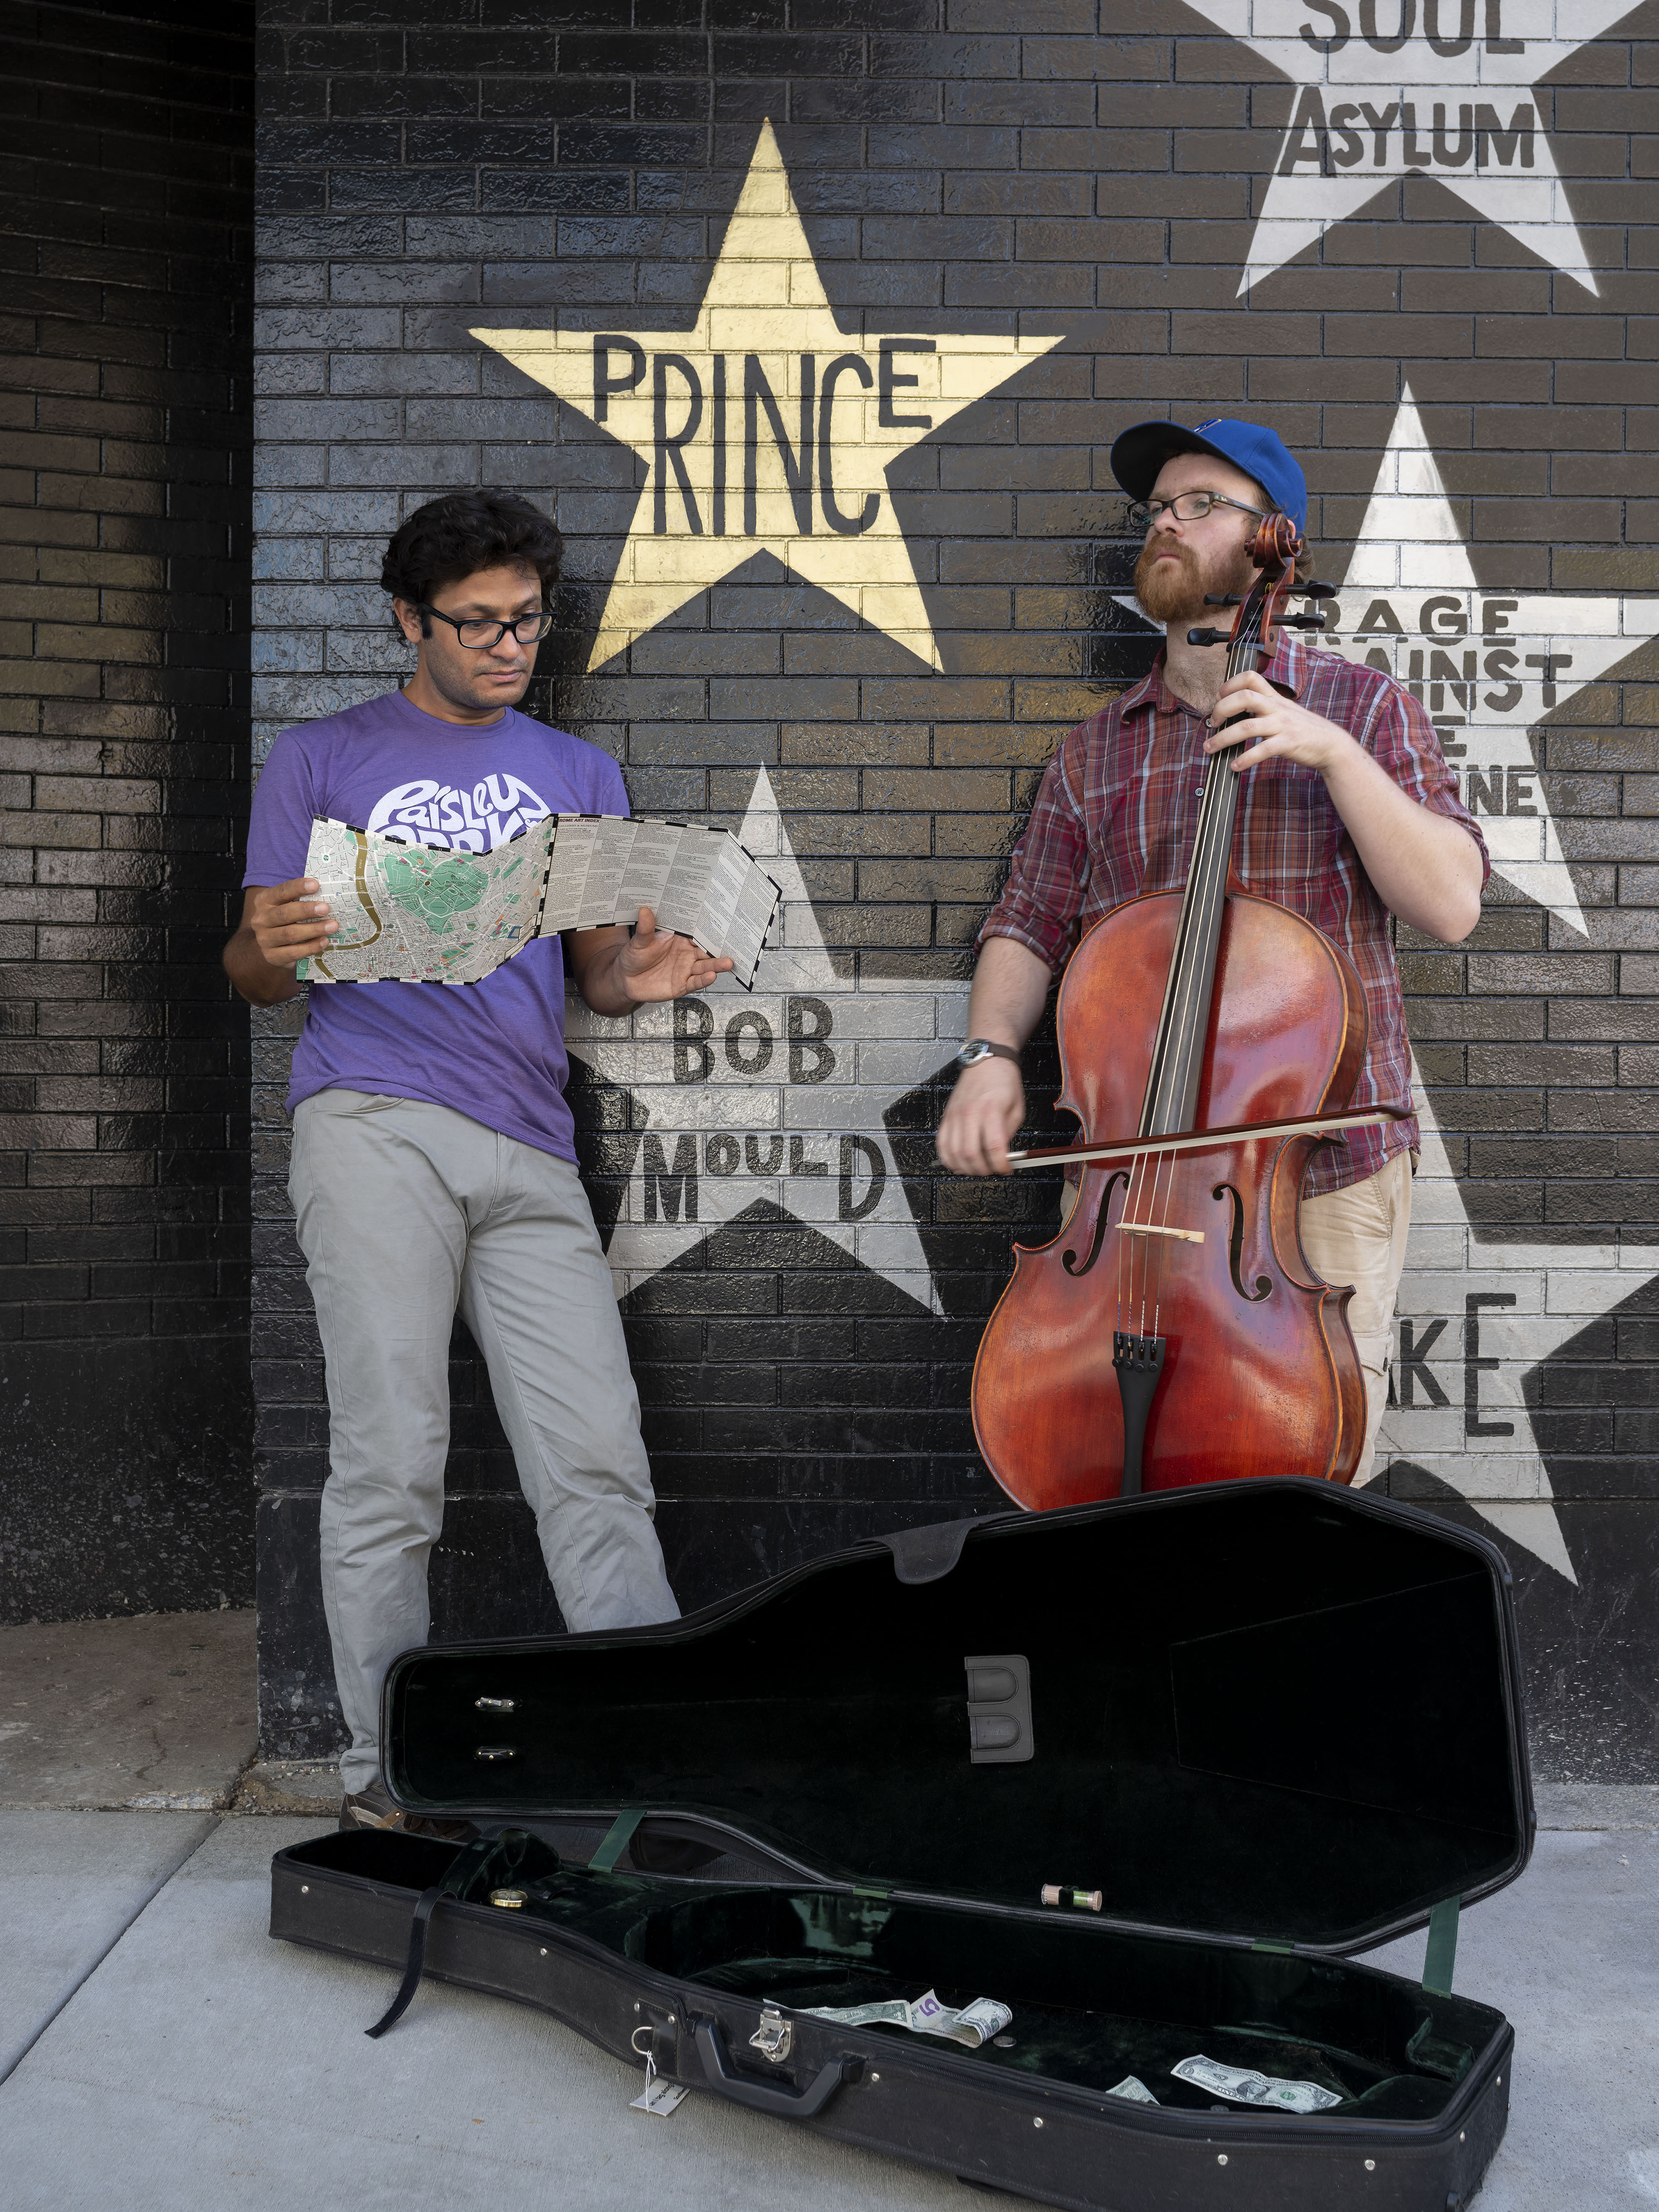 A man leans on First Avenue club wall near the prince star, while a student plays the cello.